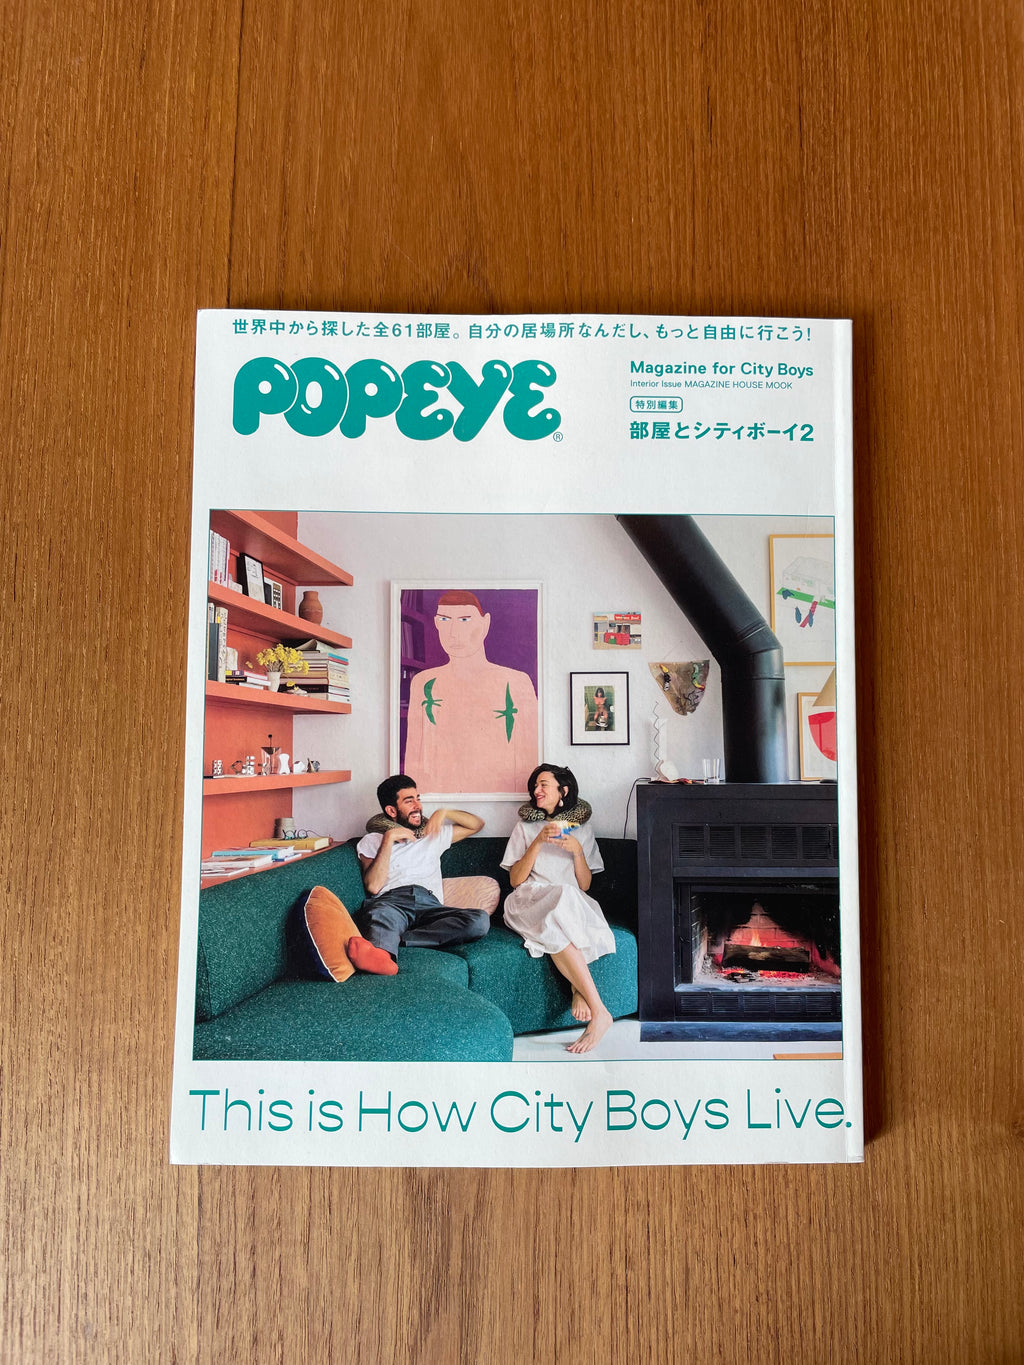 This is How City Boys Live - Interior Issue